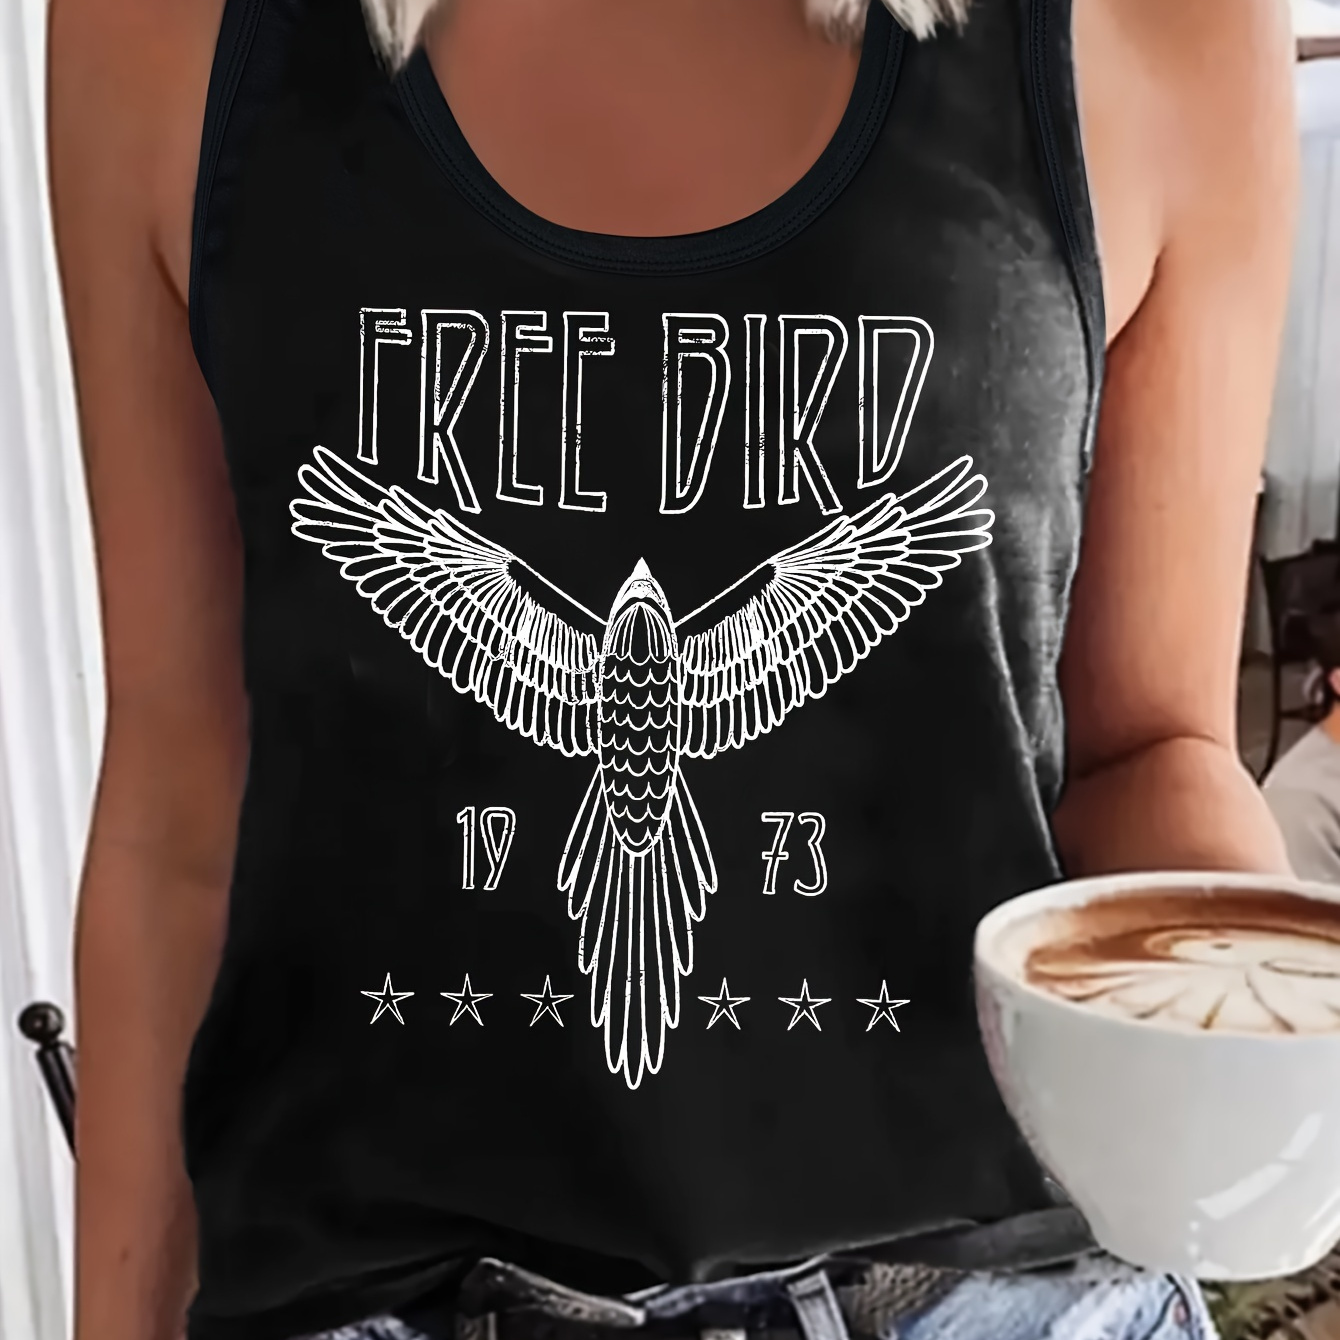 

Free Bird Print Tank Top, Sleeveless Casual Top For Summer & Spring, Women's Clothing